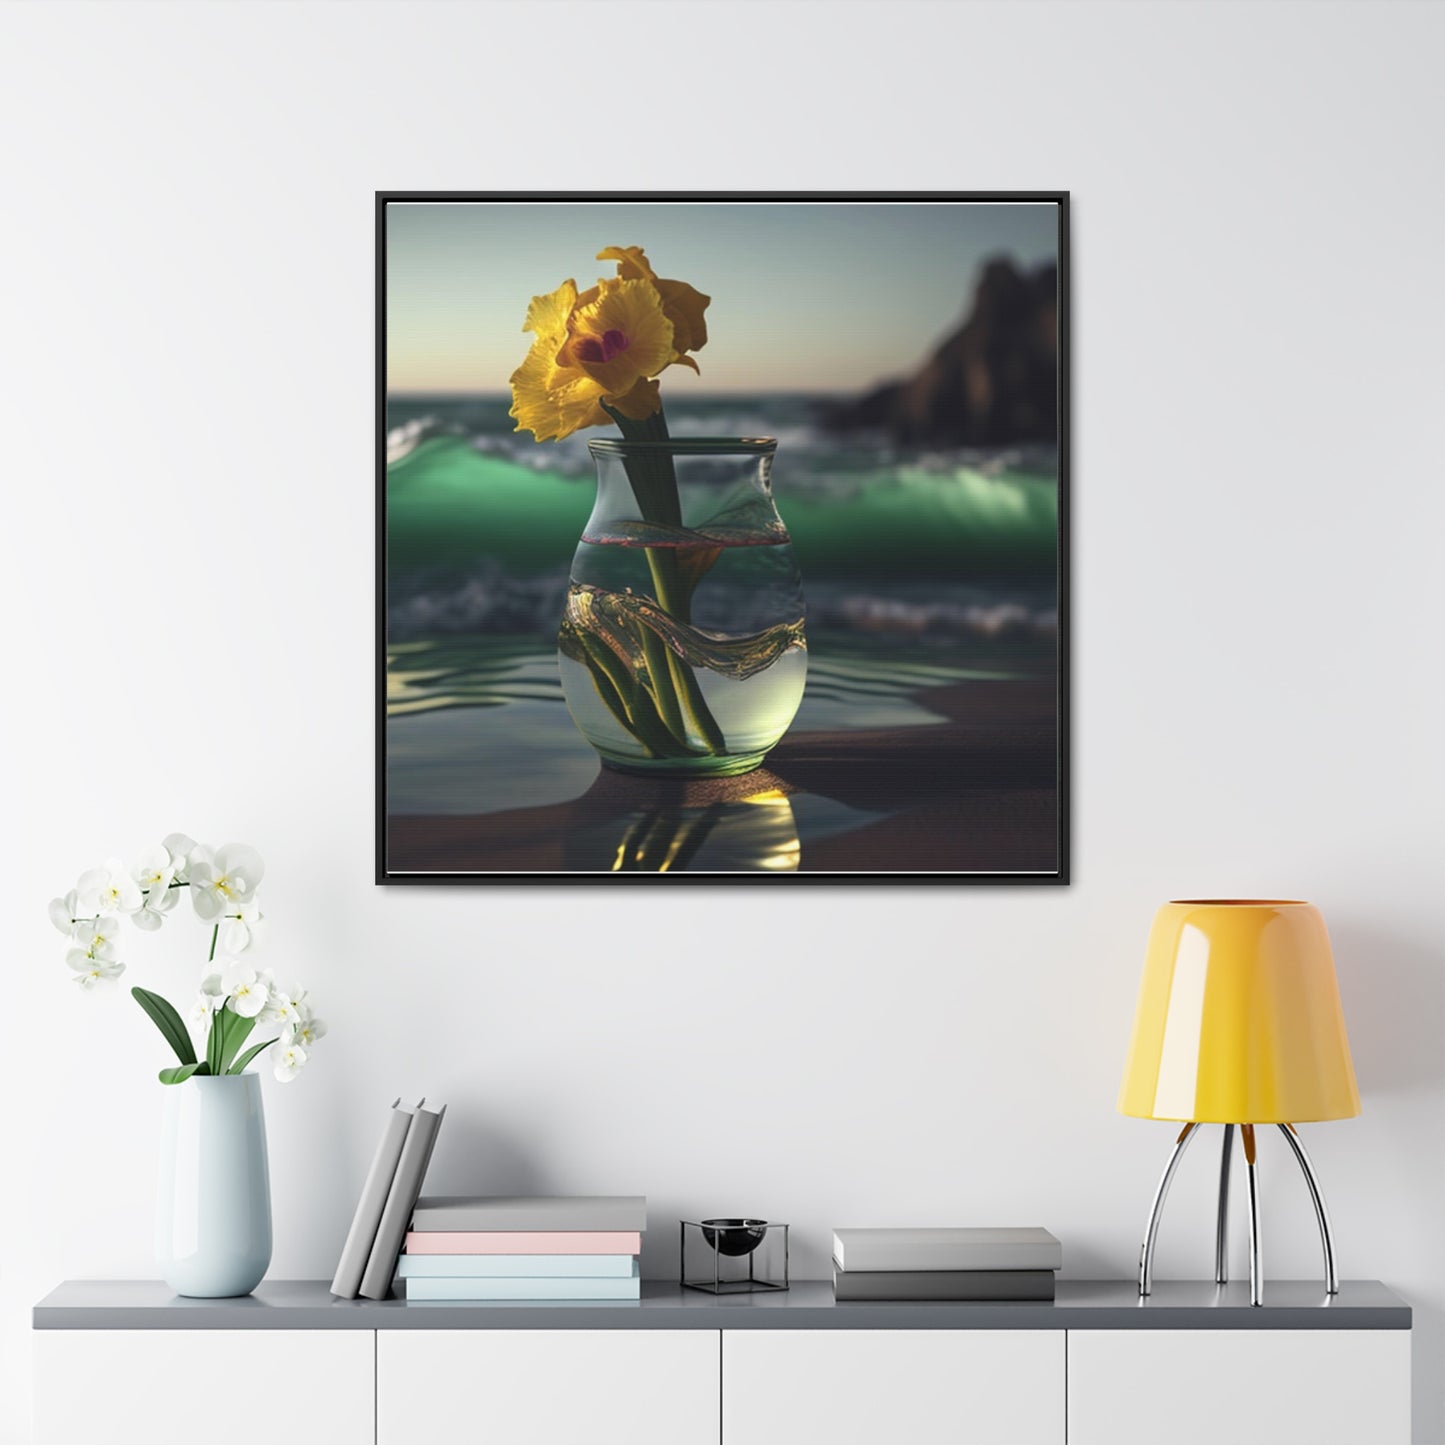 Gallery Canvas Wraps, Square Frame Yellow Gladiolus glass 1